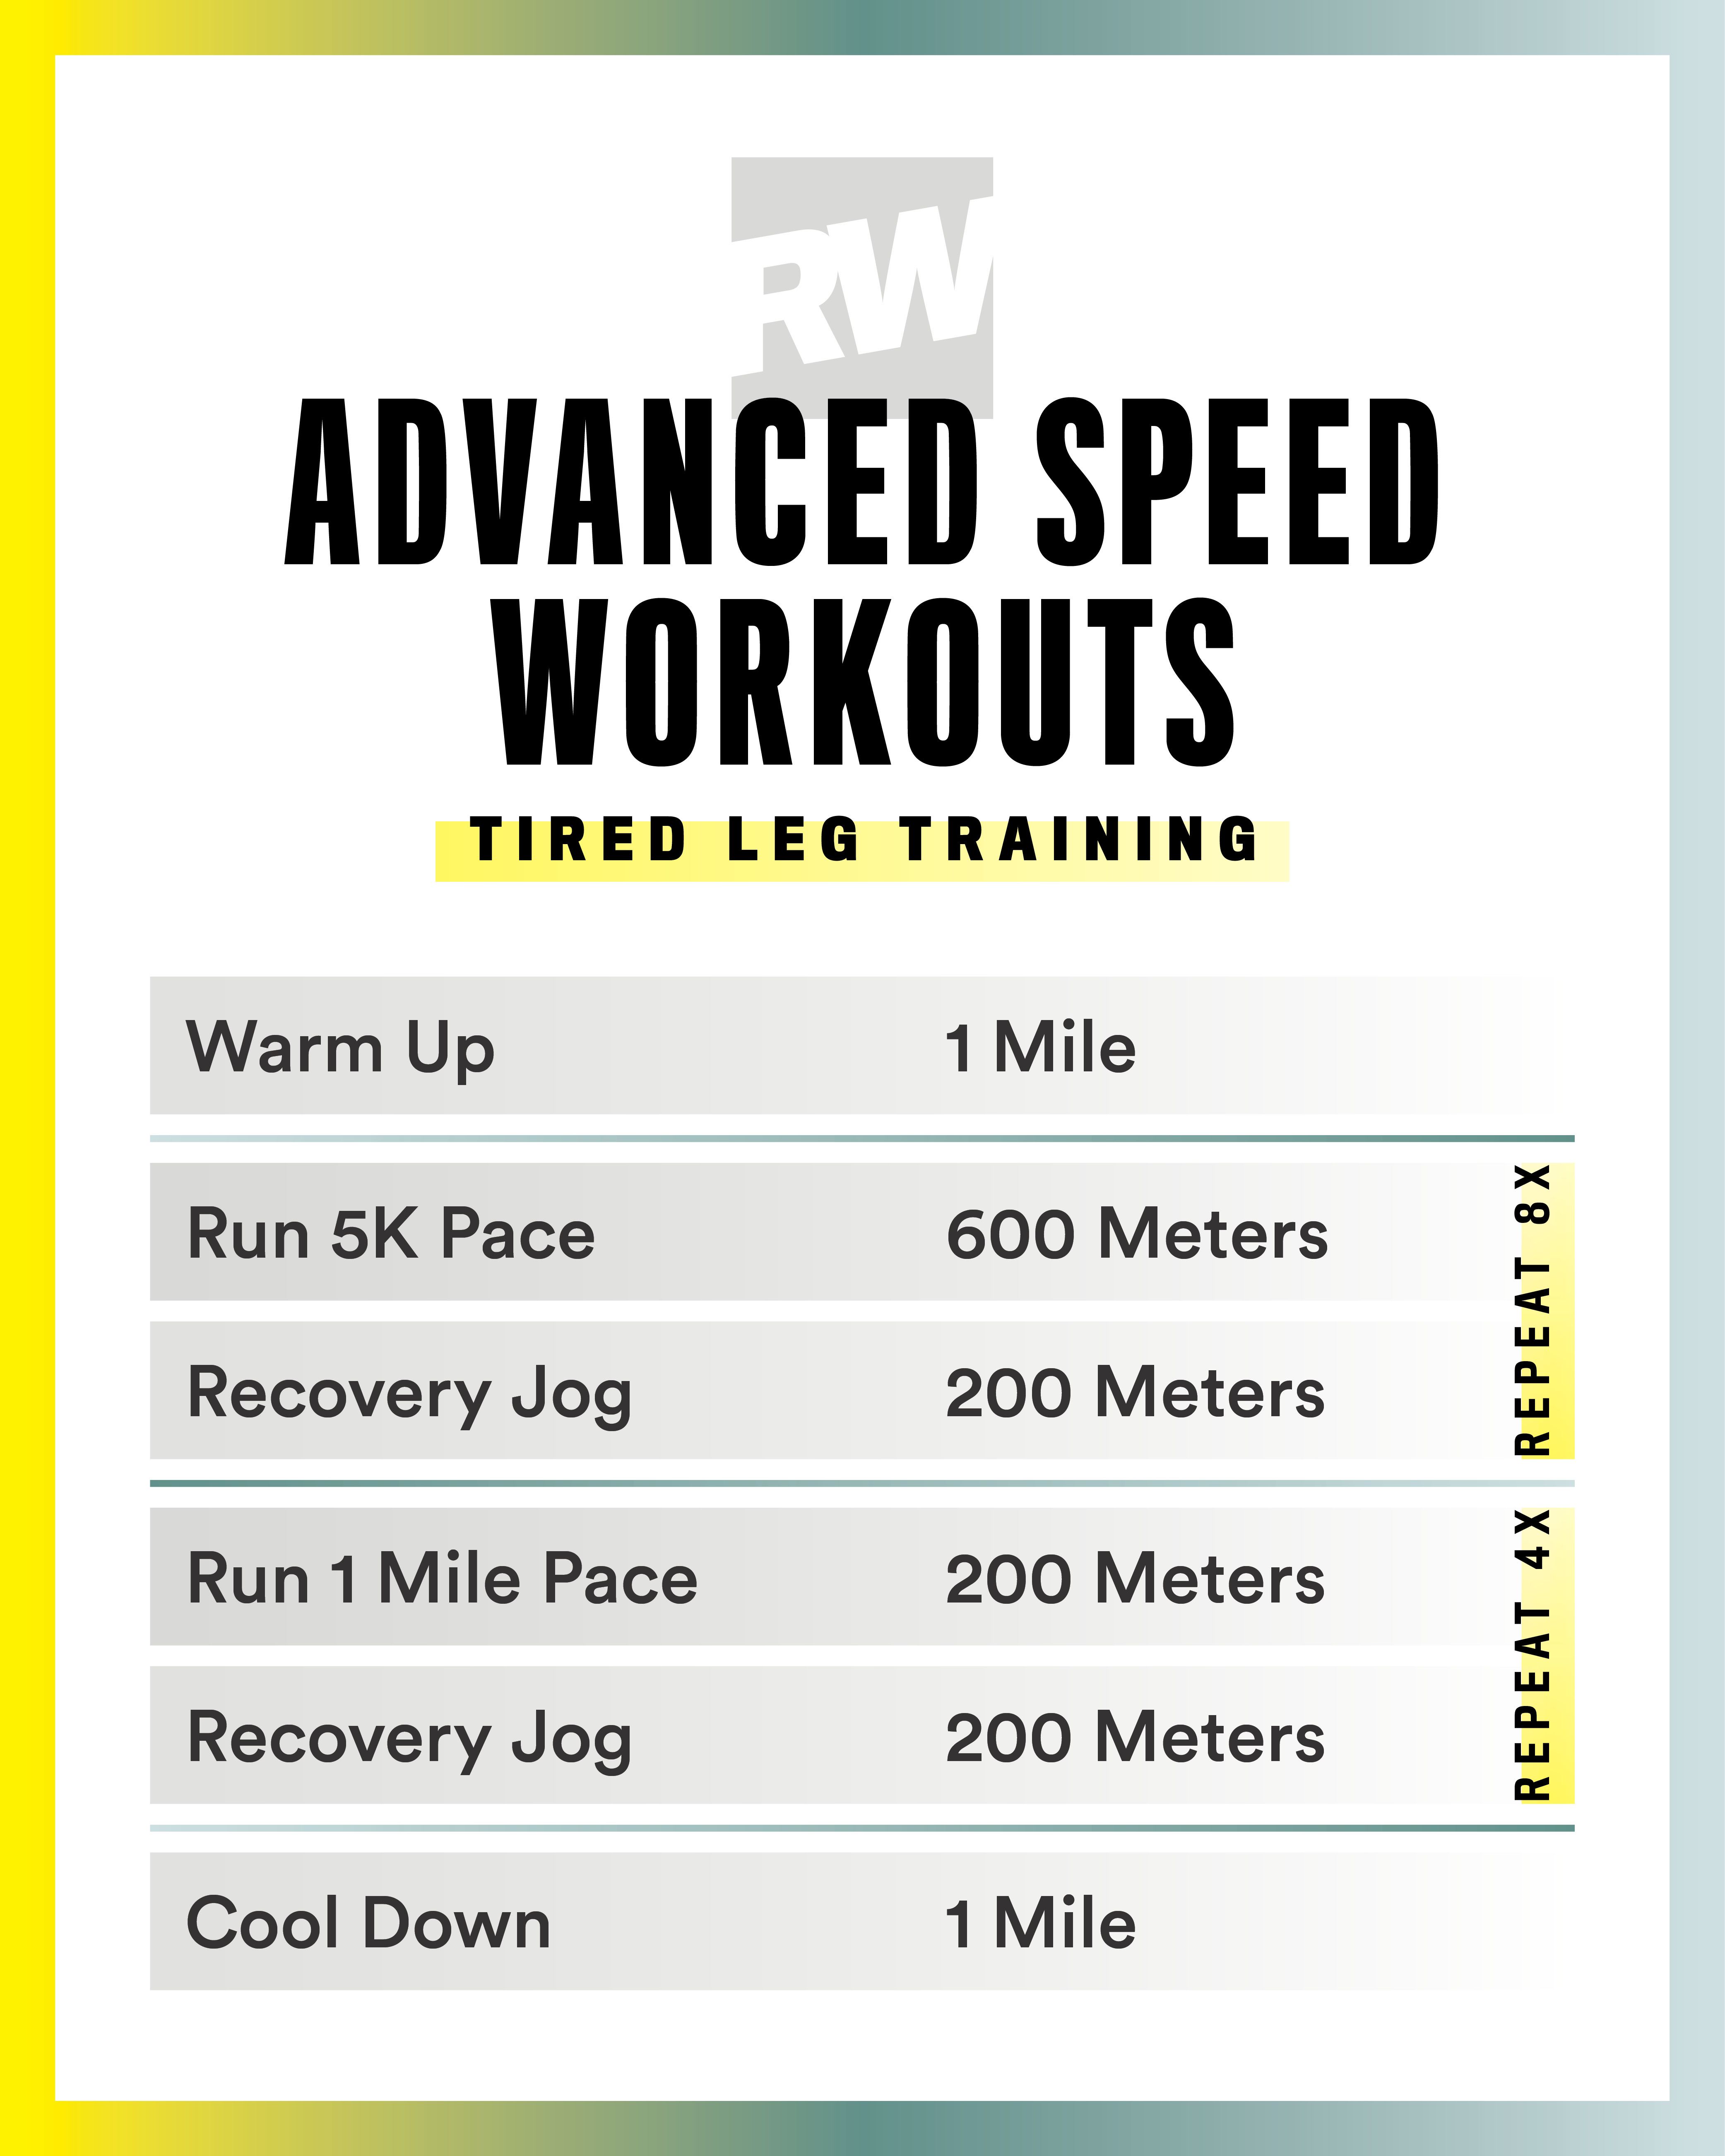 1 Minute Running Intervals to Quickly Build Speed and Endurance